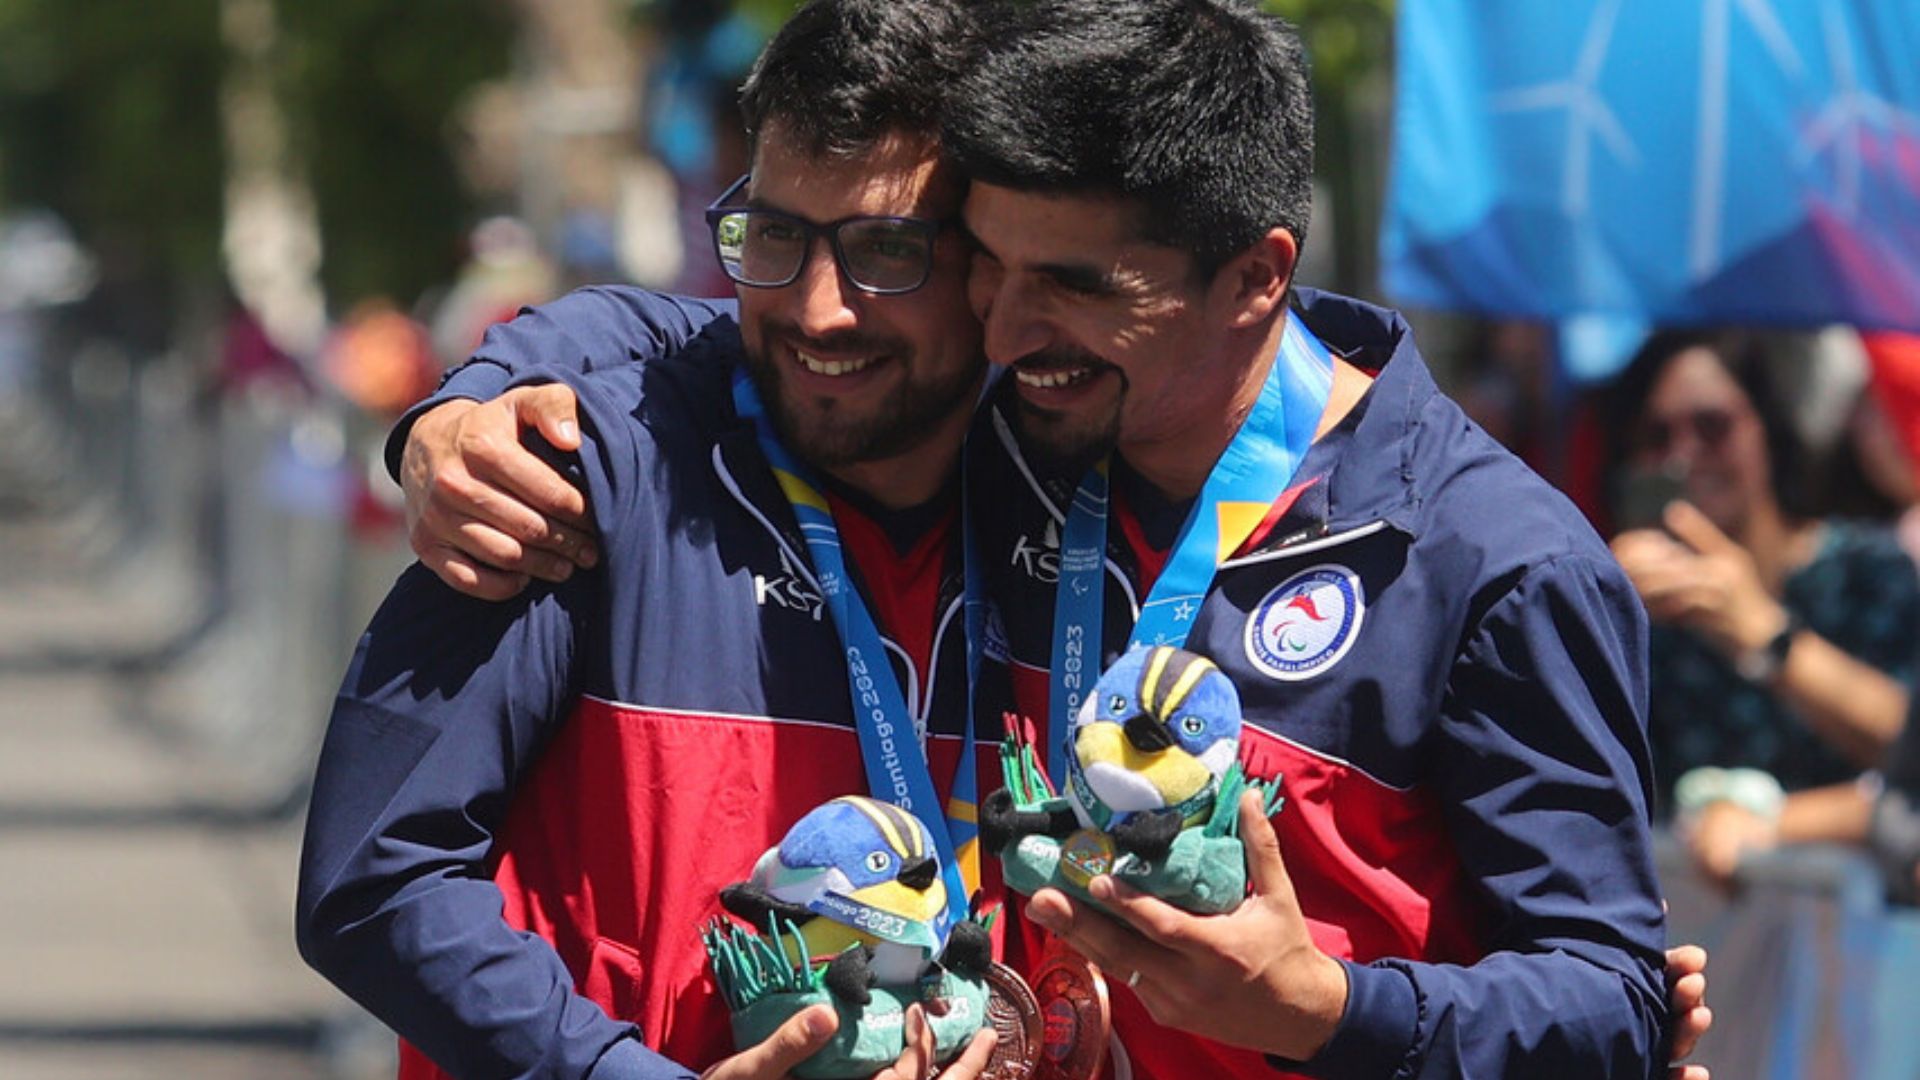 Cycling Provided Chile's Only Medal of the Day